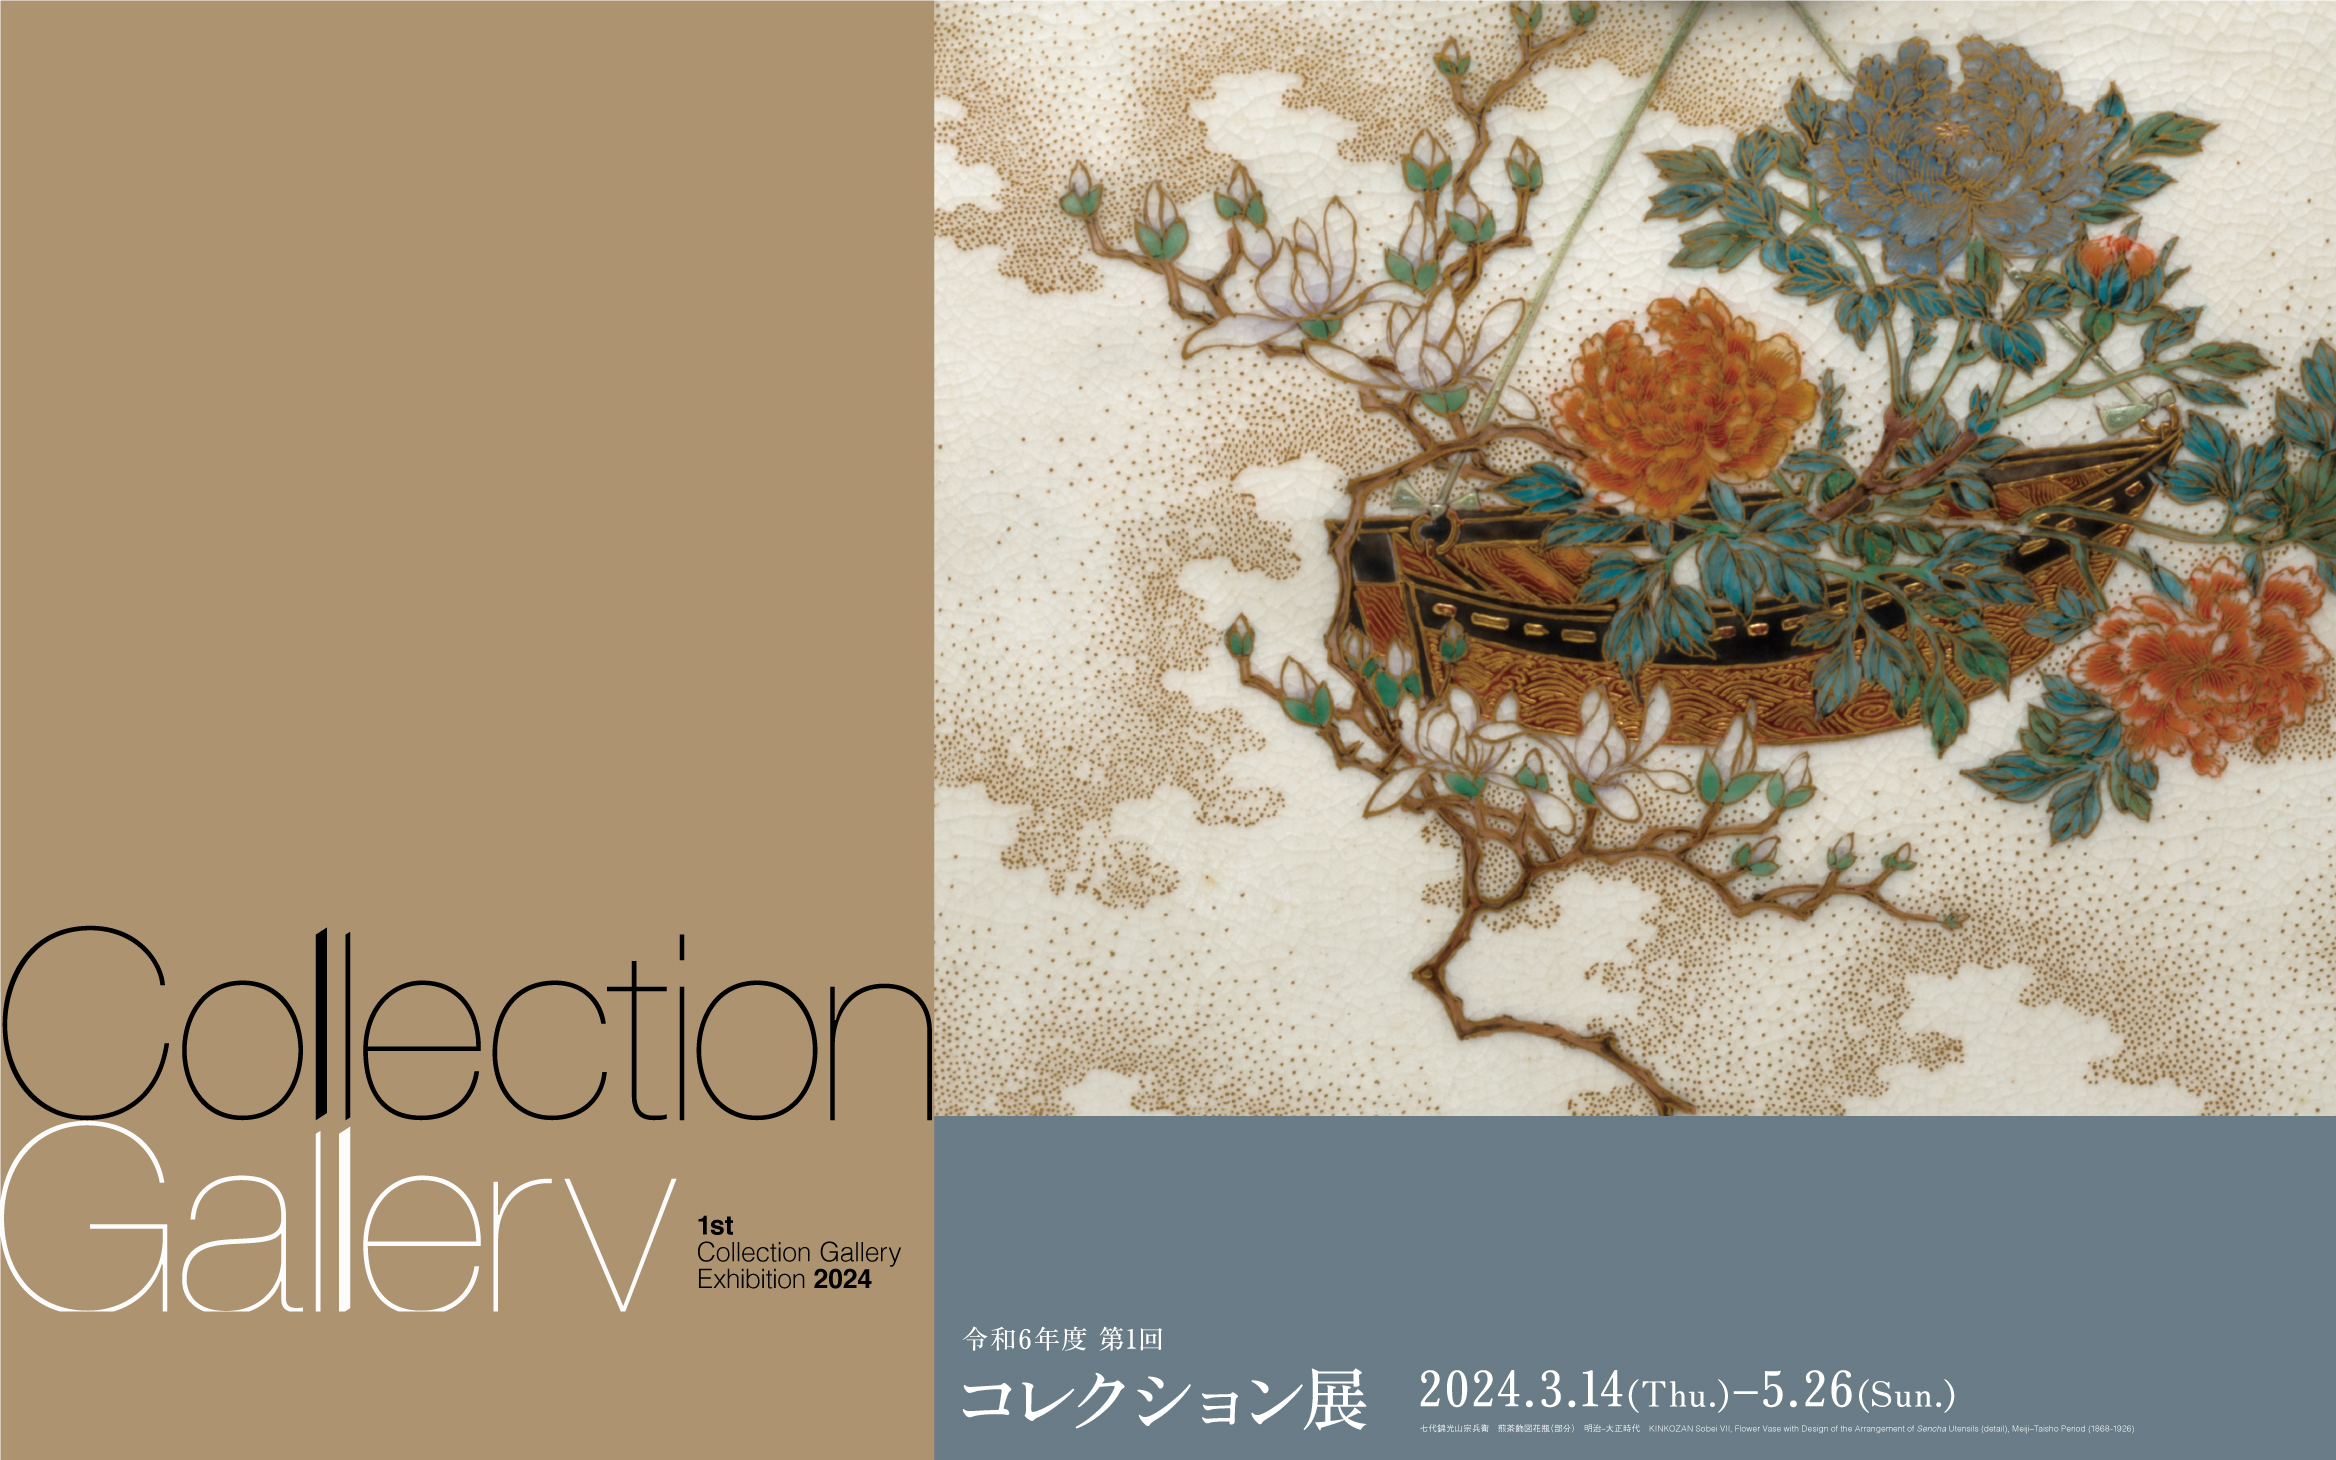 4th Collection Gallery Exhibition 2023-2024